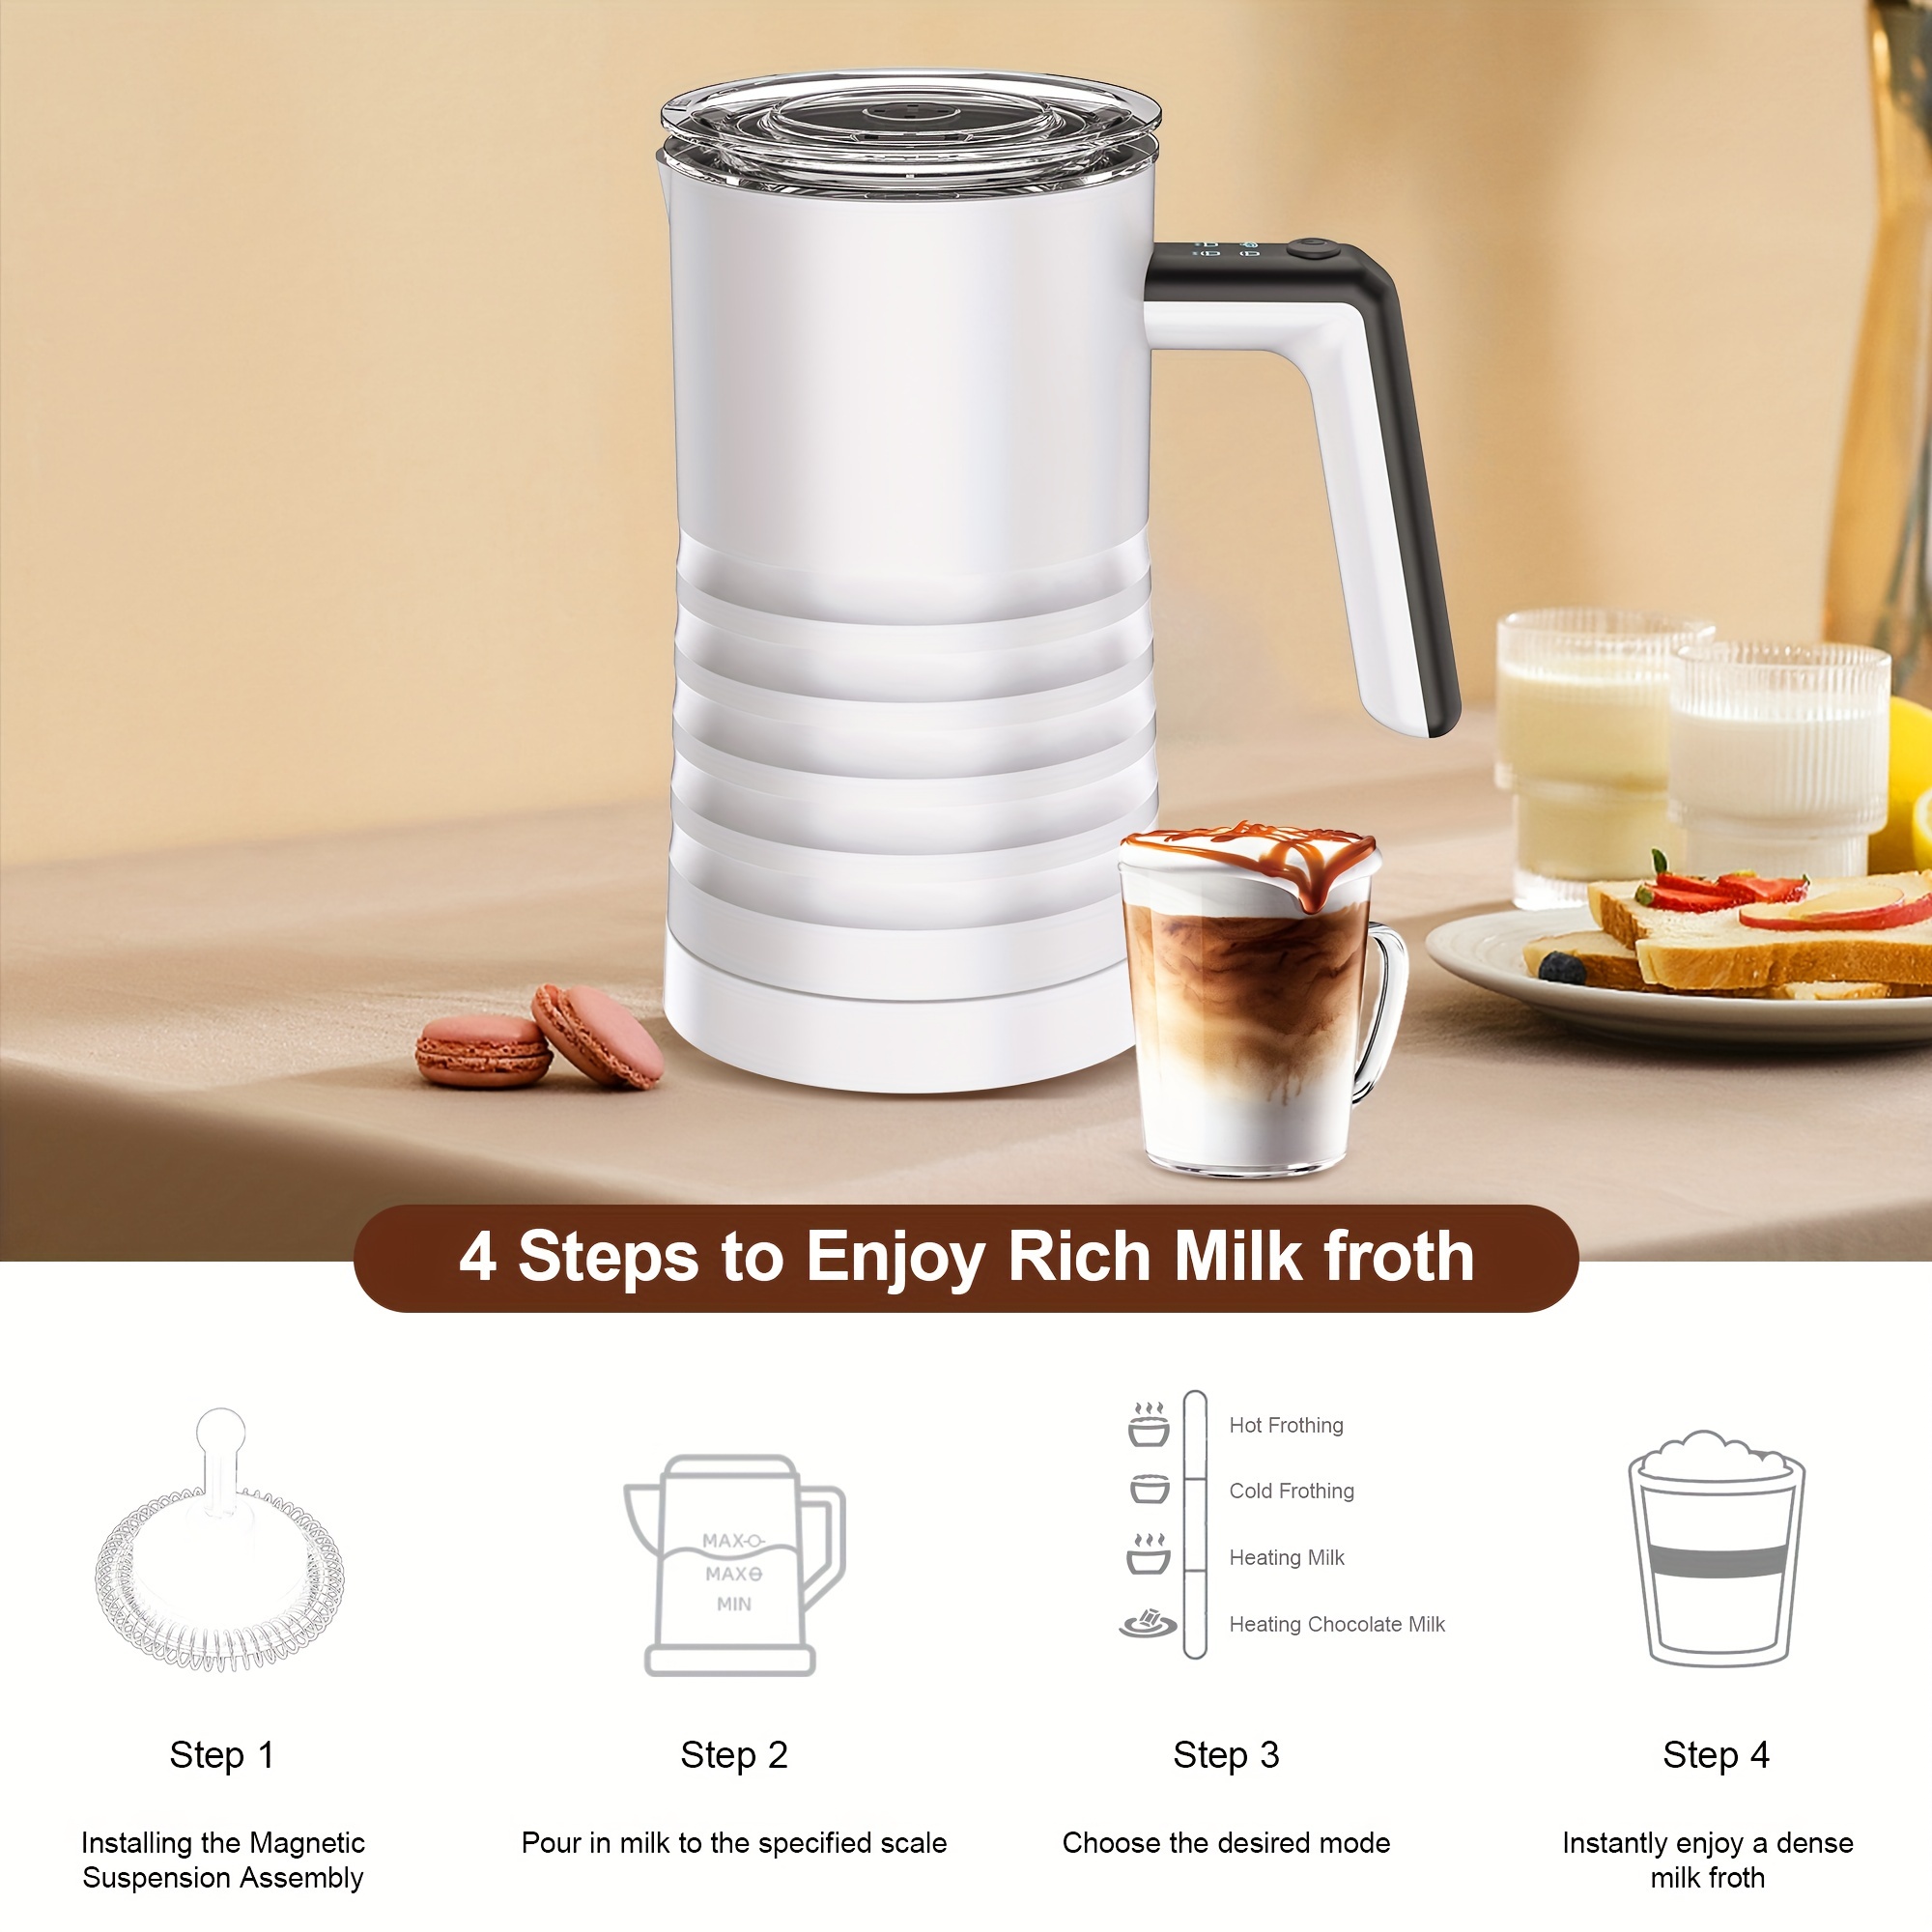 Fully Automatic Electric Milk Frother Stainless Steel Electric Hot And Cold  Milk Frother Household Coffee Stirrer 110v 220v